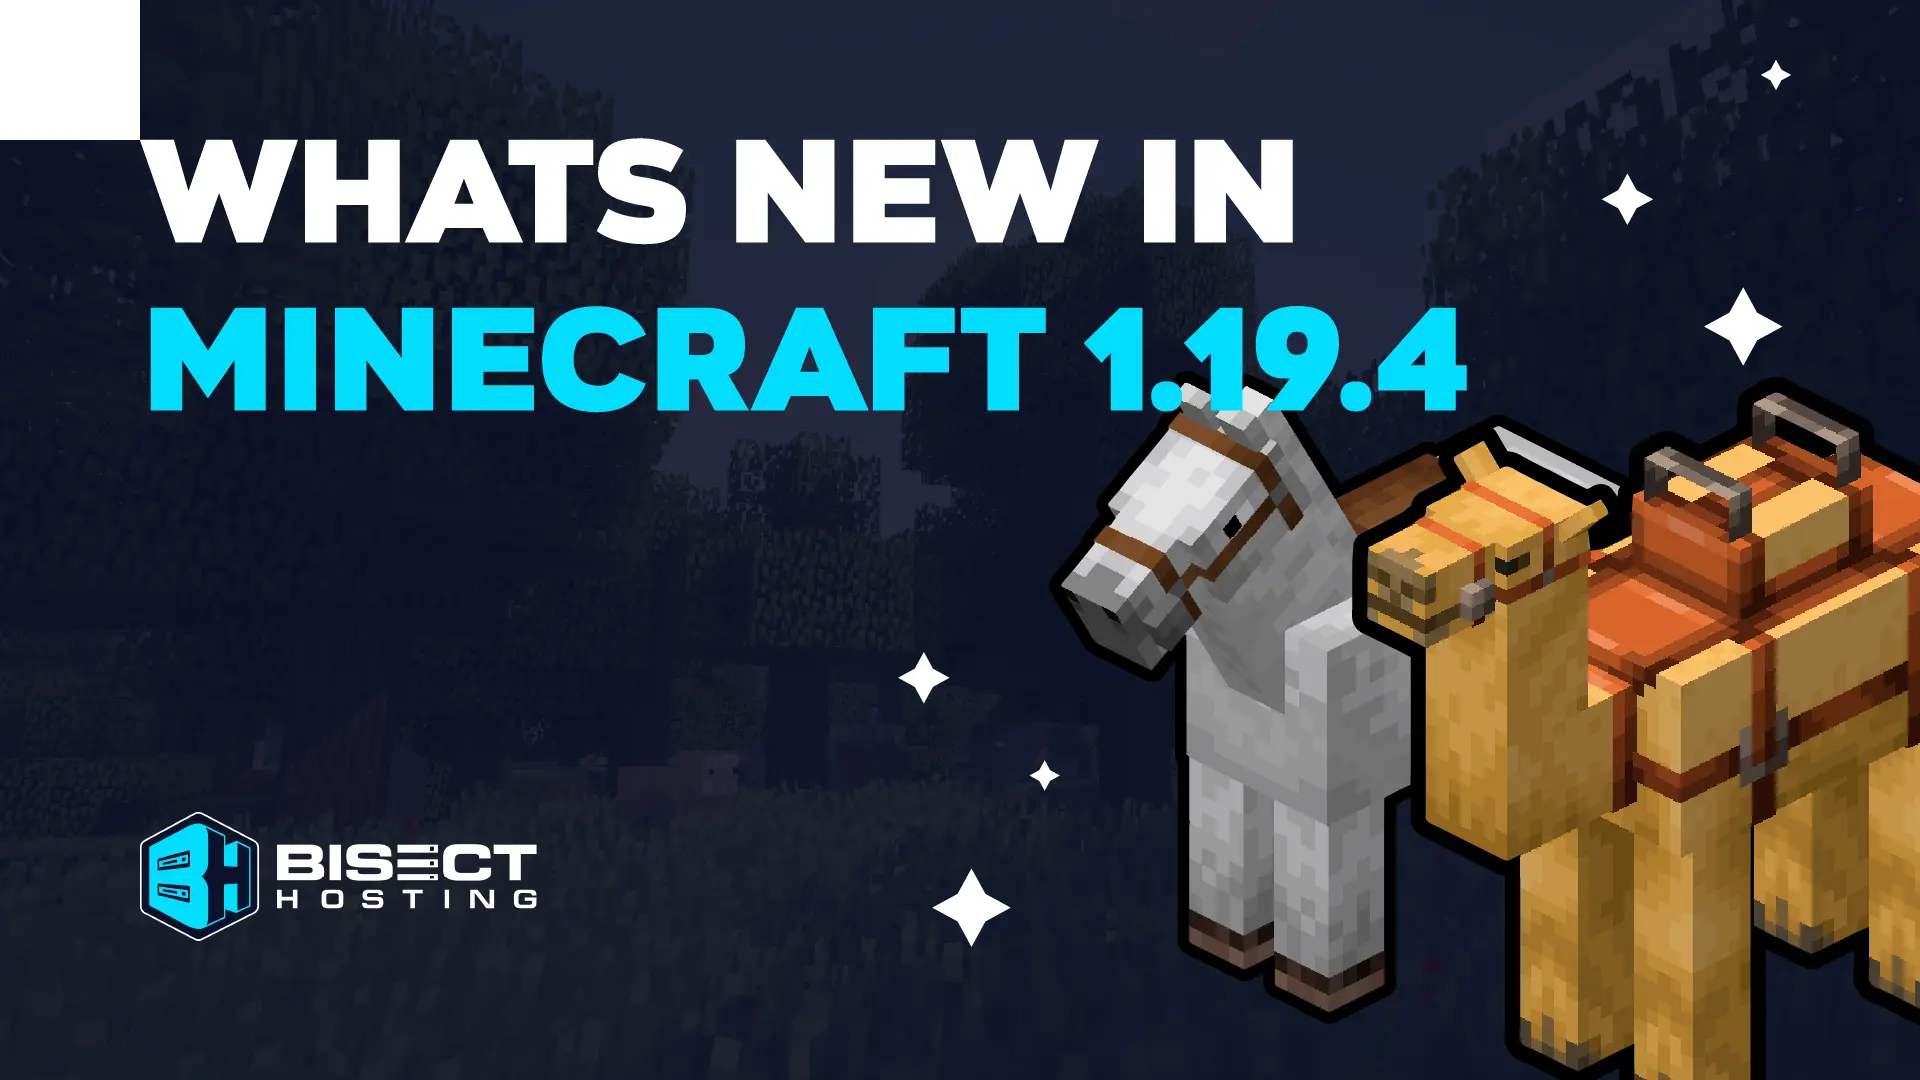 What’s New in Minecraft 1.19.4?